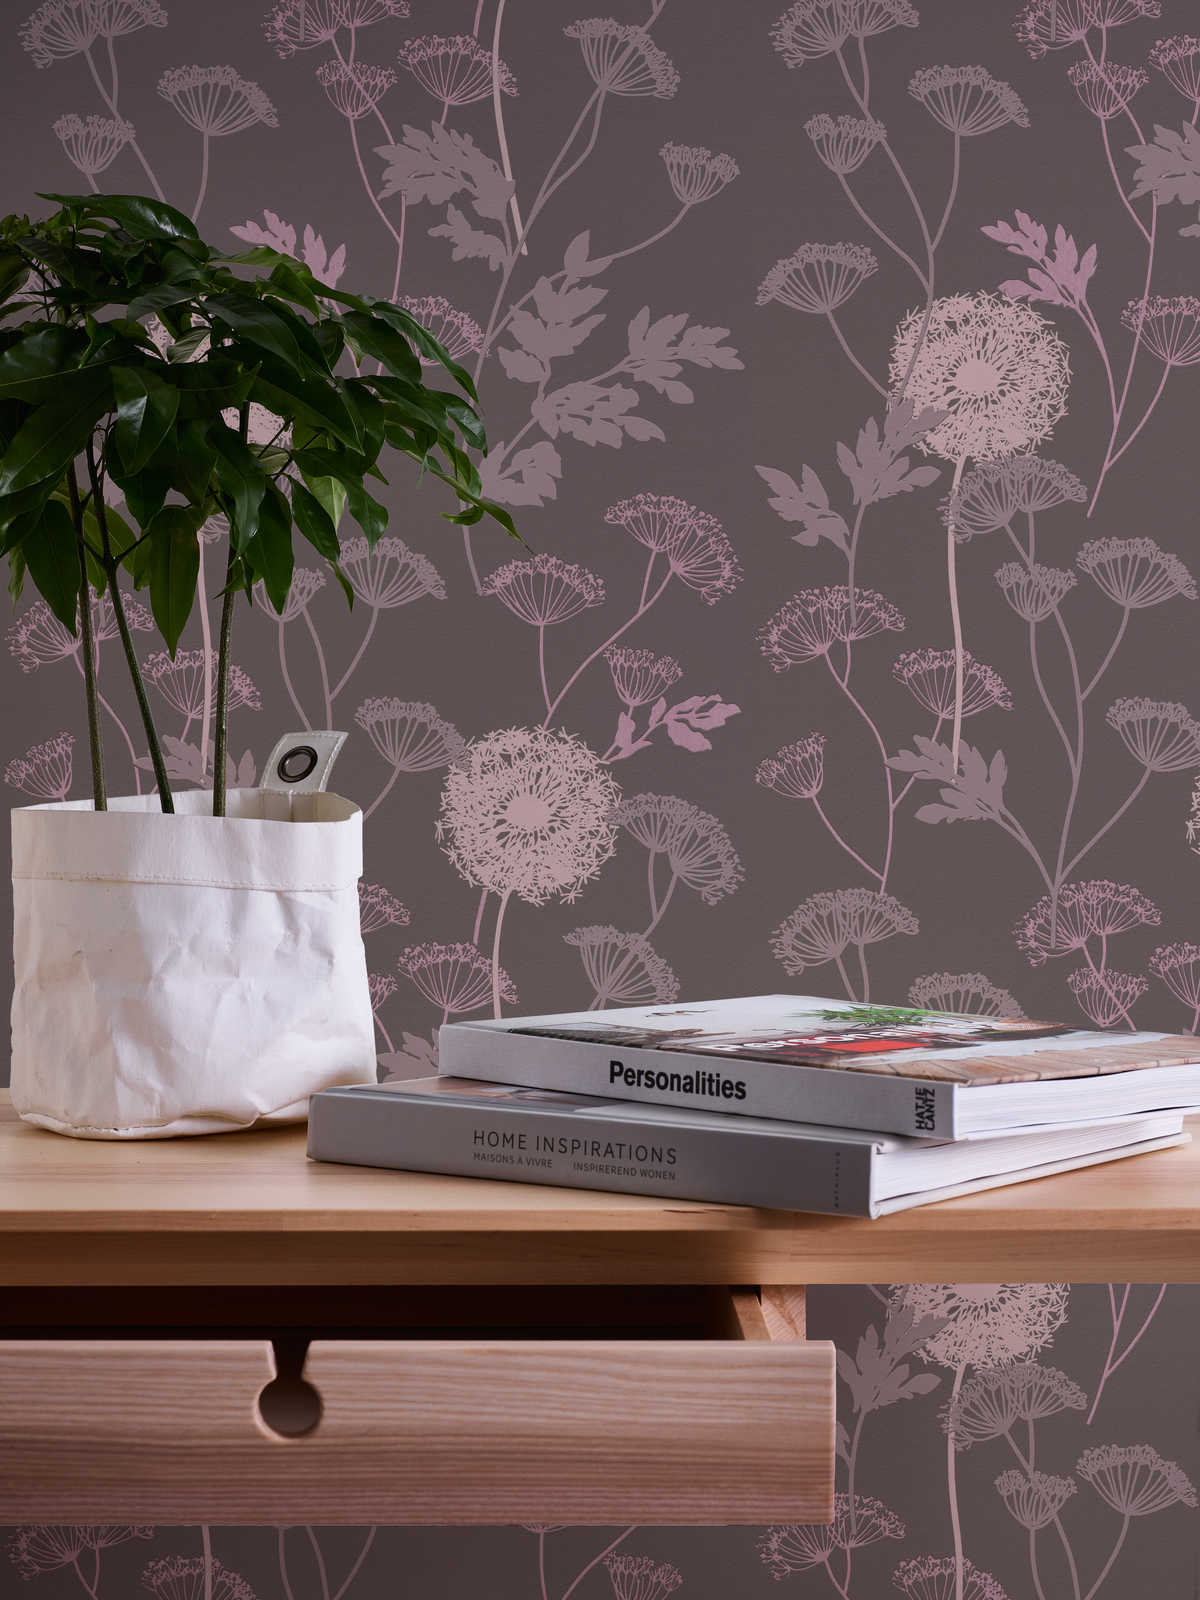             Textured wallpaper with floral pattern in warm colours - brown, pink, beige
        